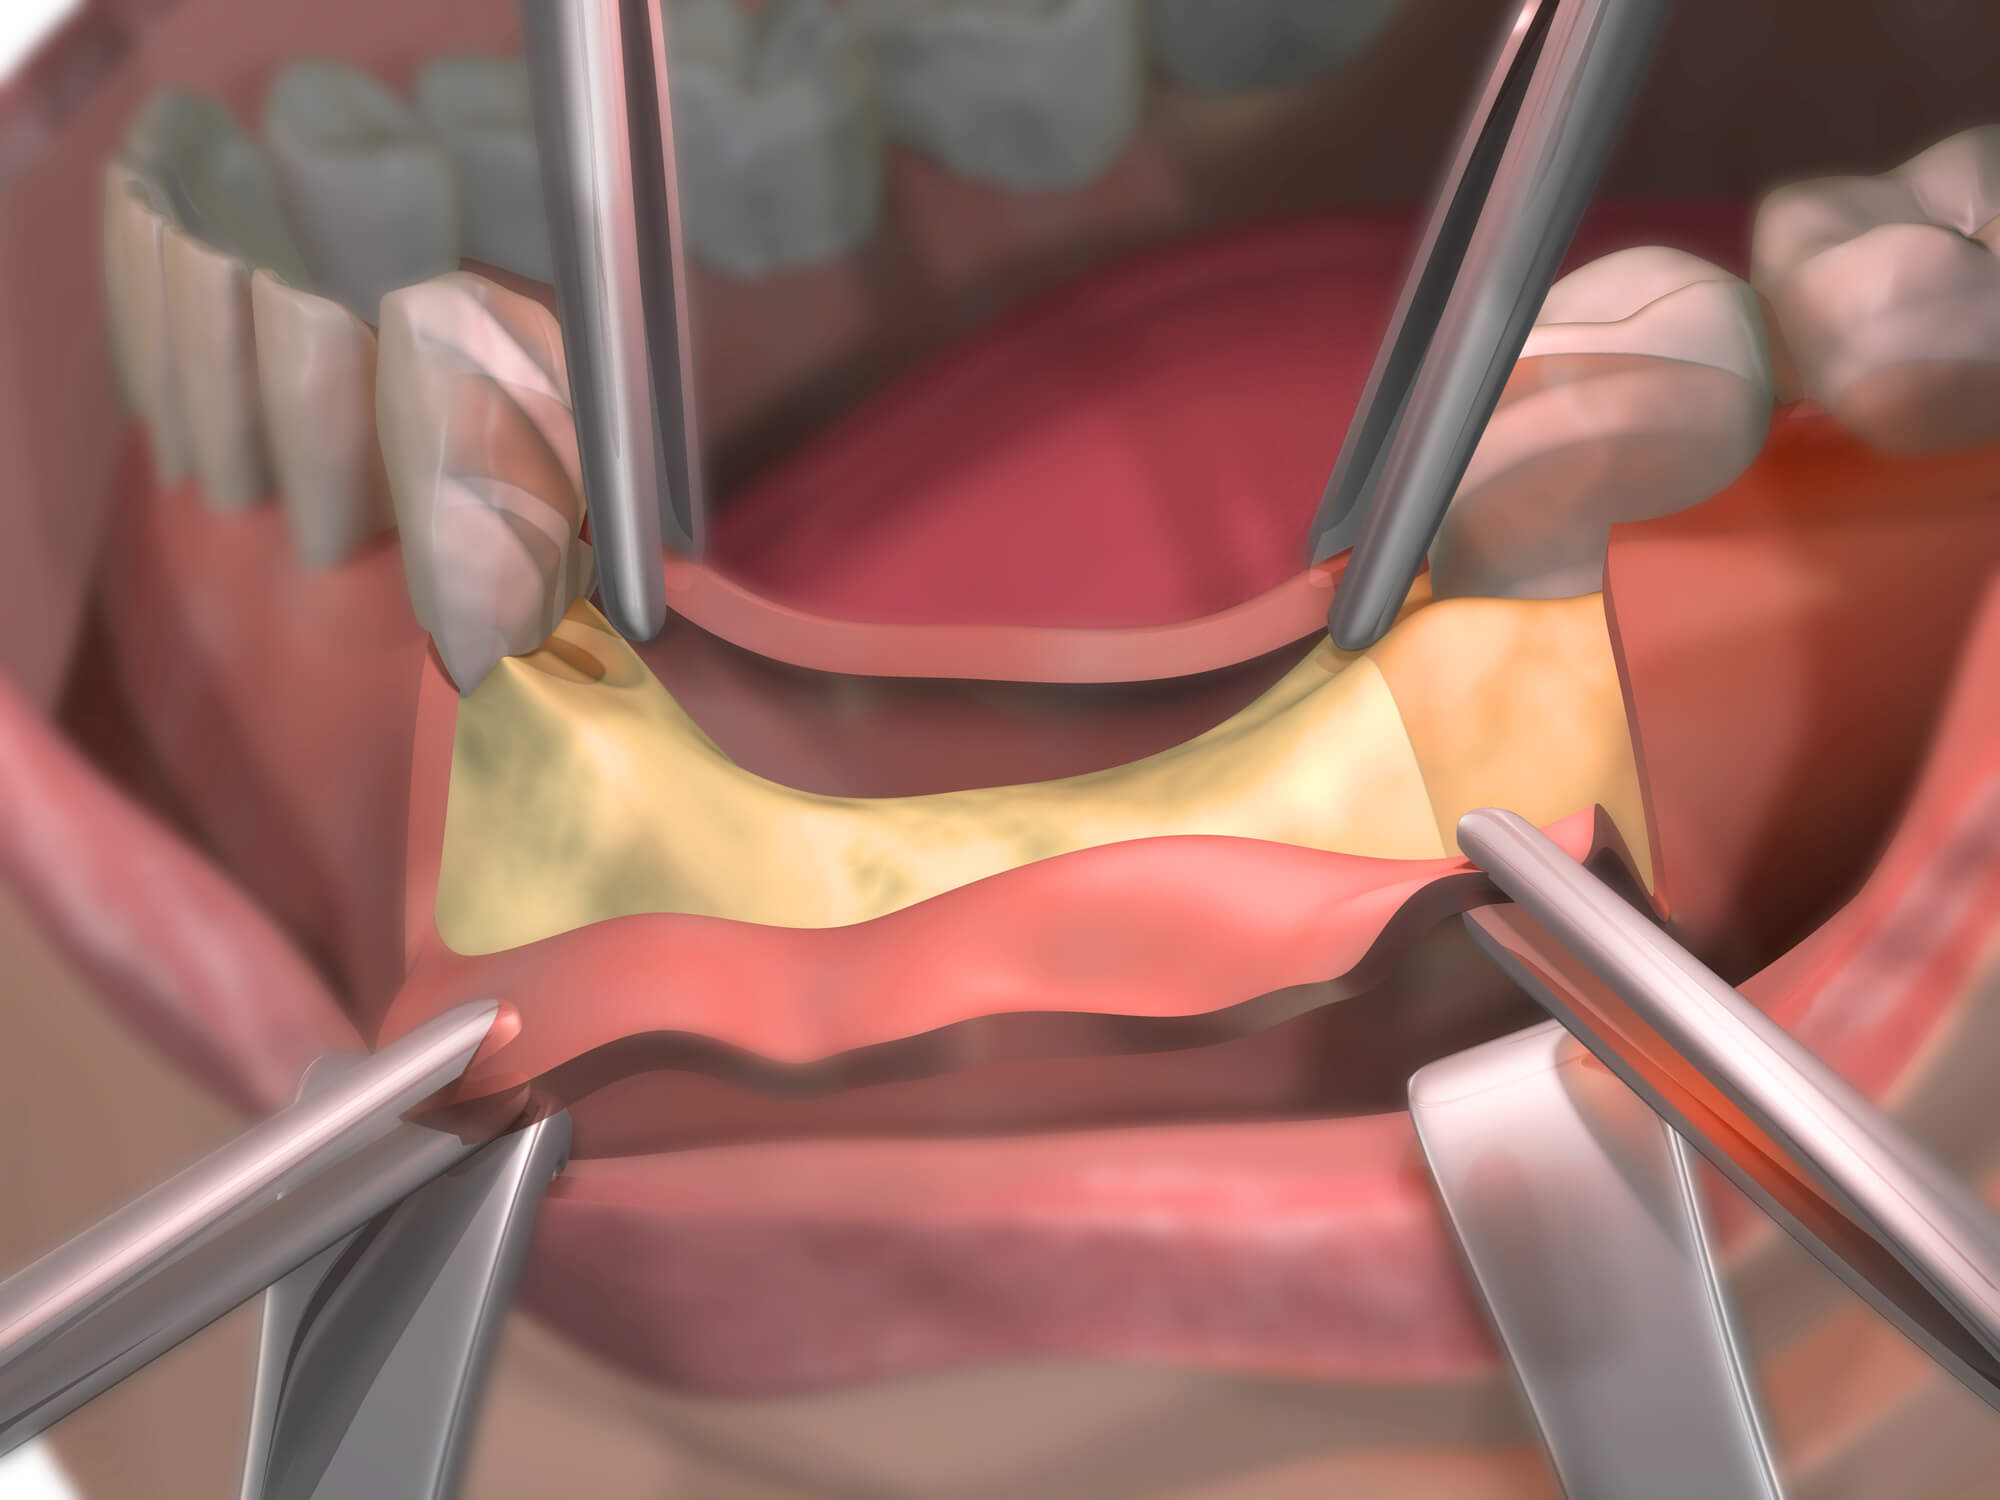 What to Expect During a Bone Grafting Treatment